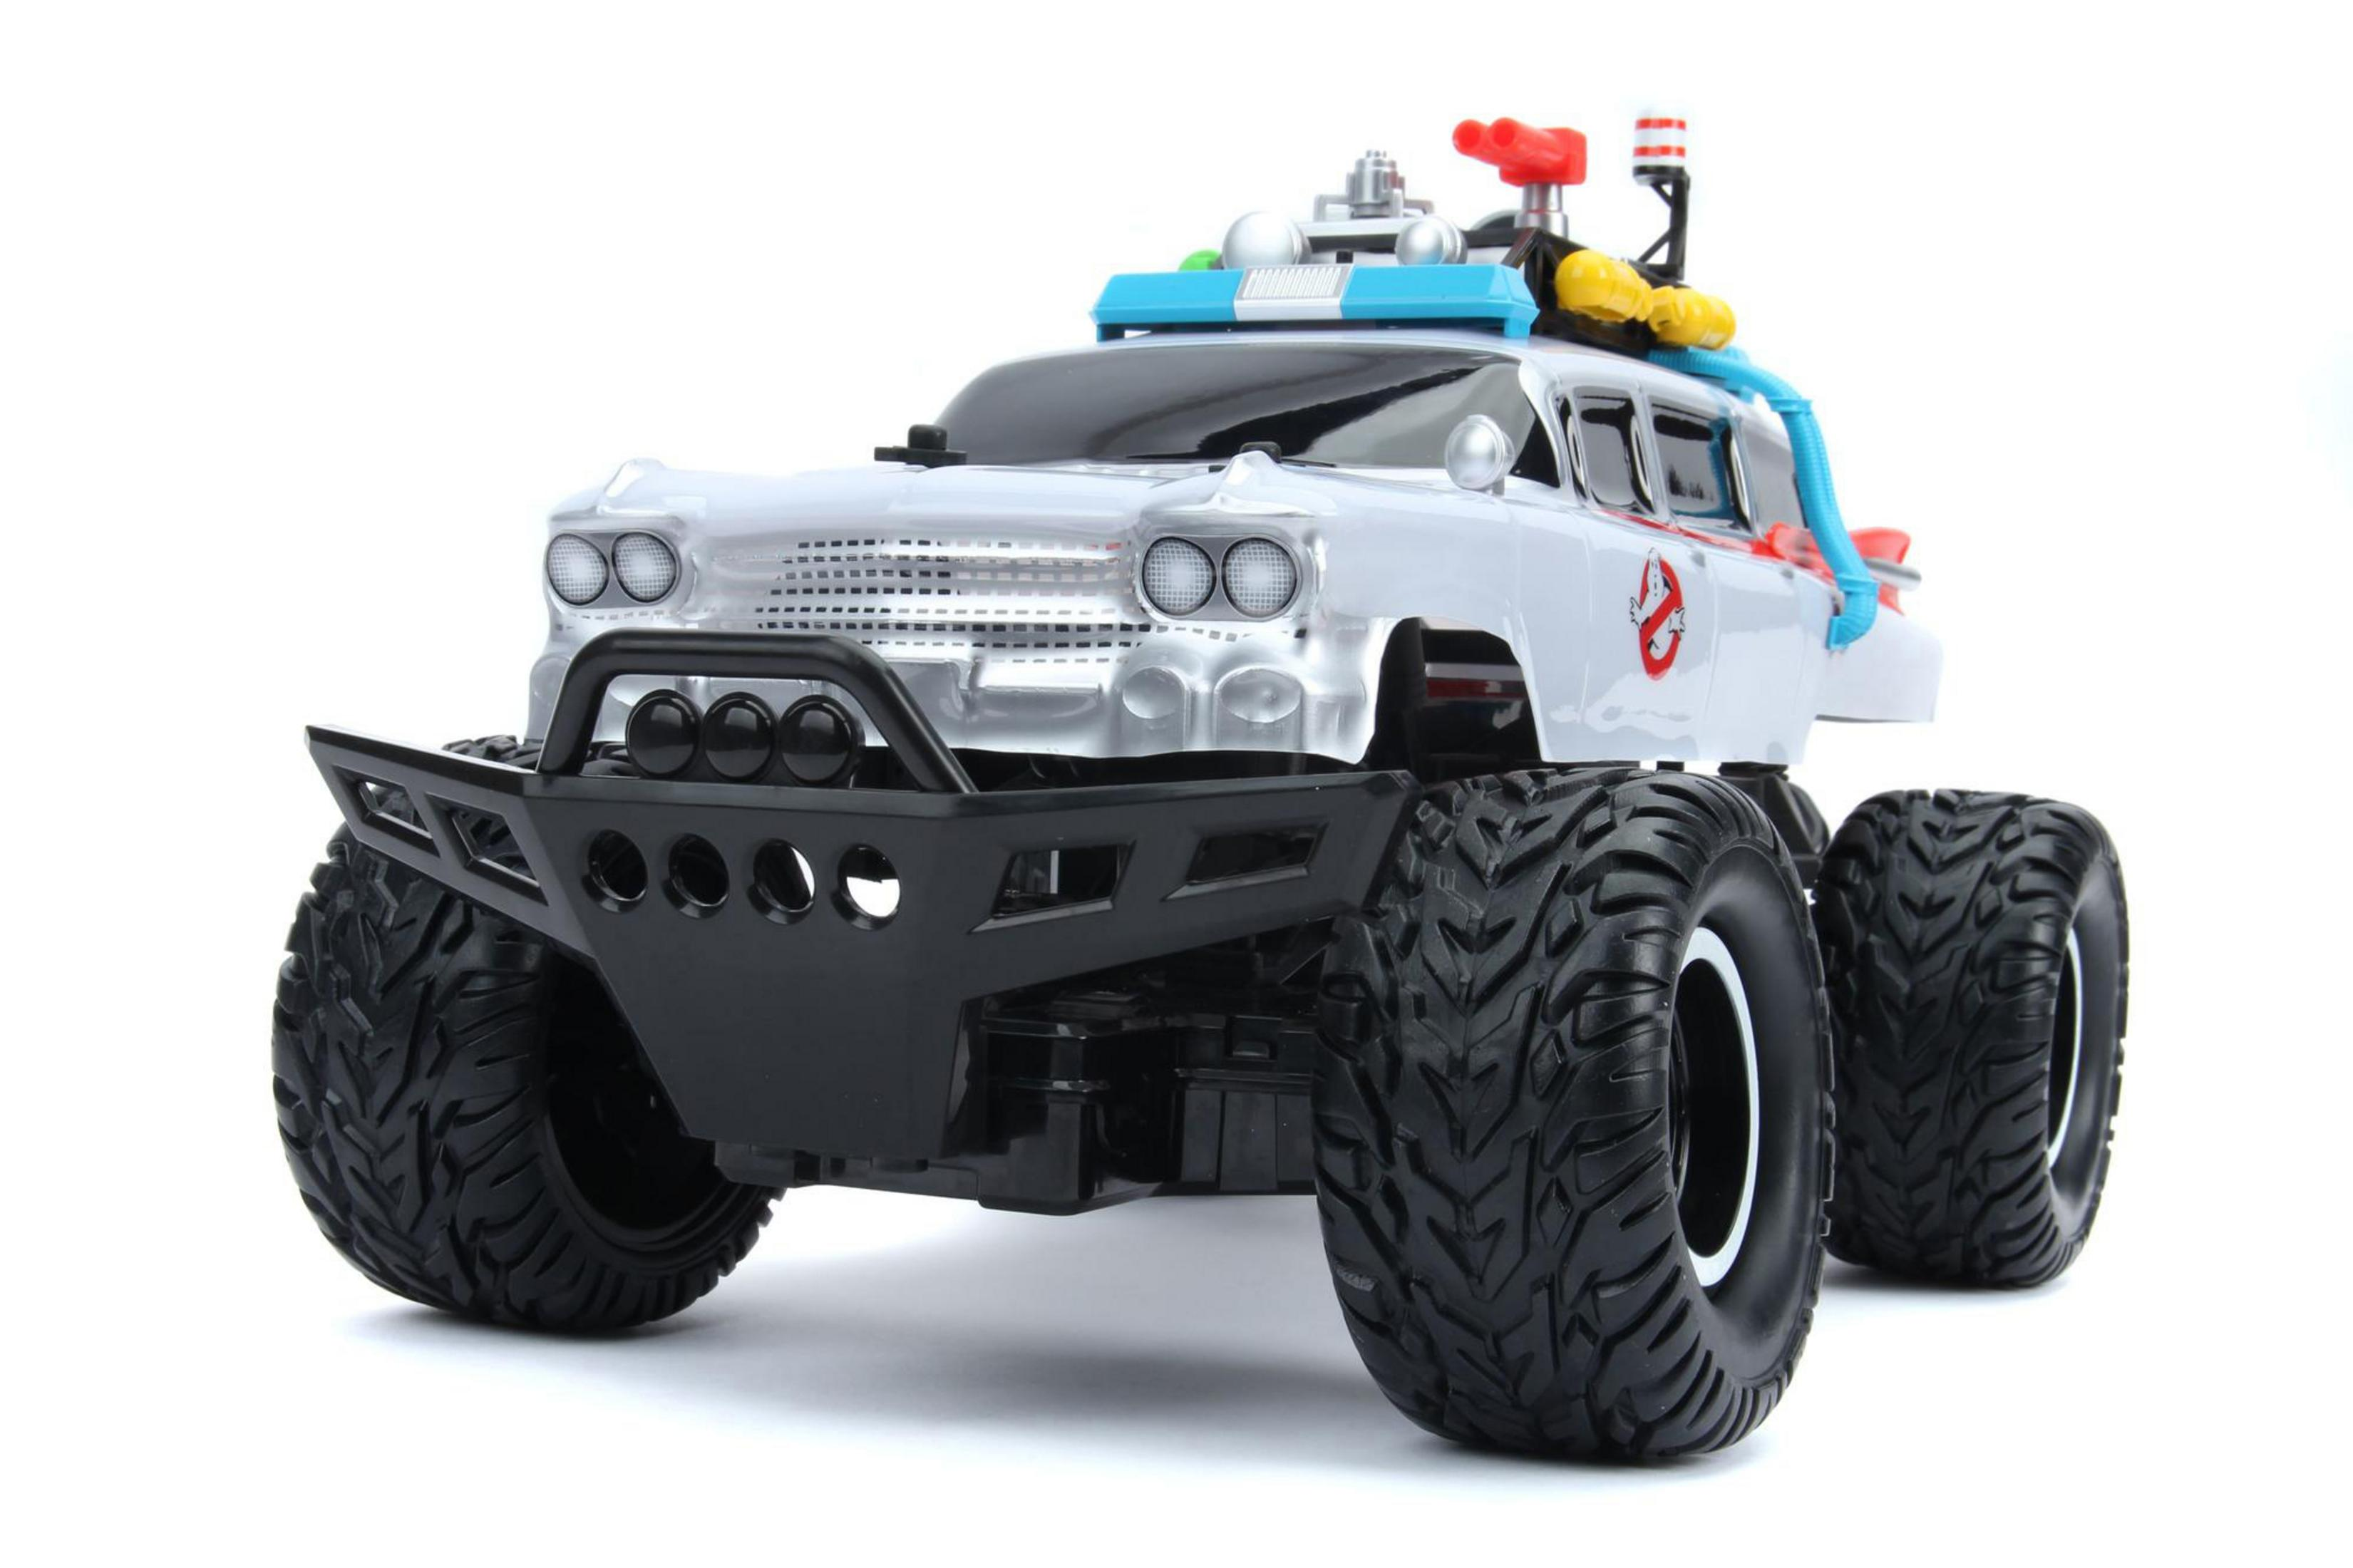 Mehrfarbig RC 253239000 OFFROAD DICKIE GHOSTBUSTERS Spielzeugauto, TOYS R/C